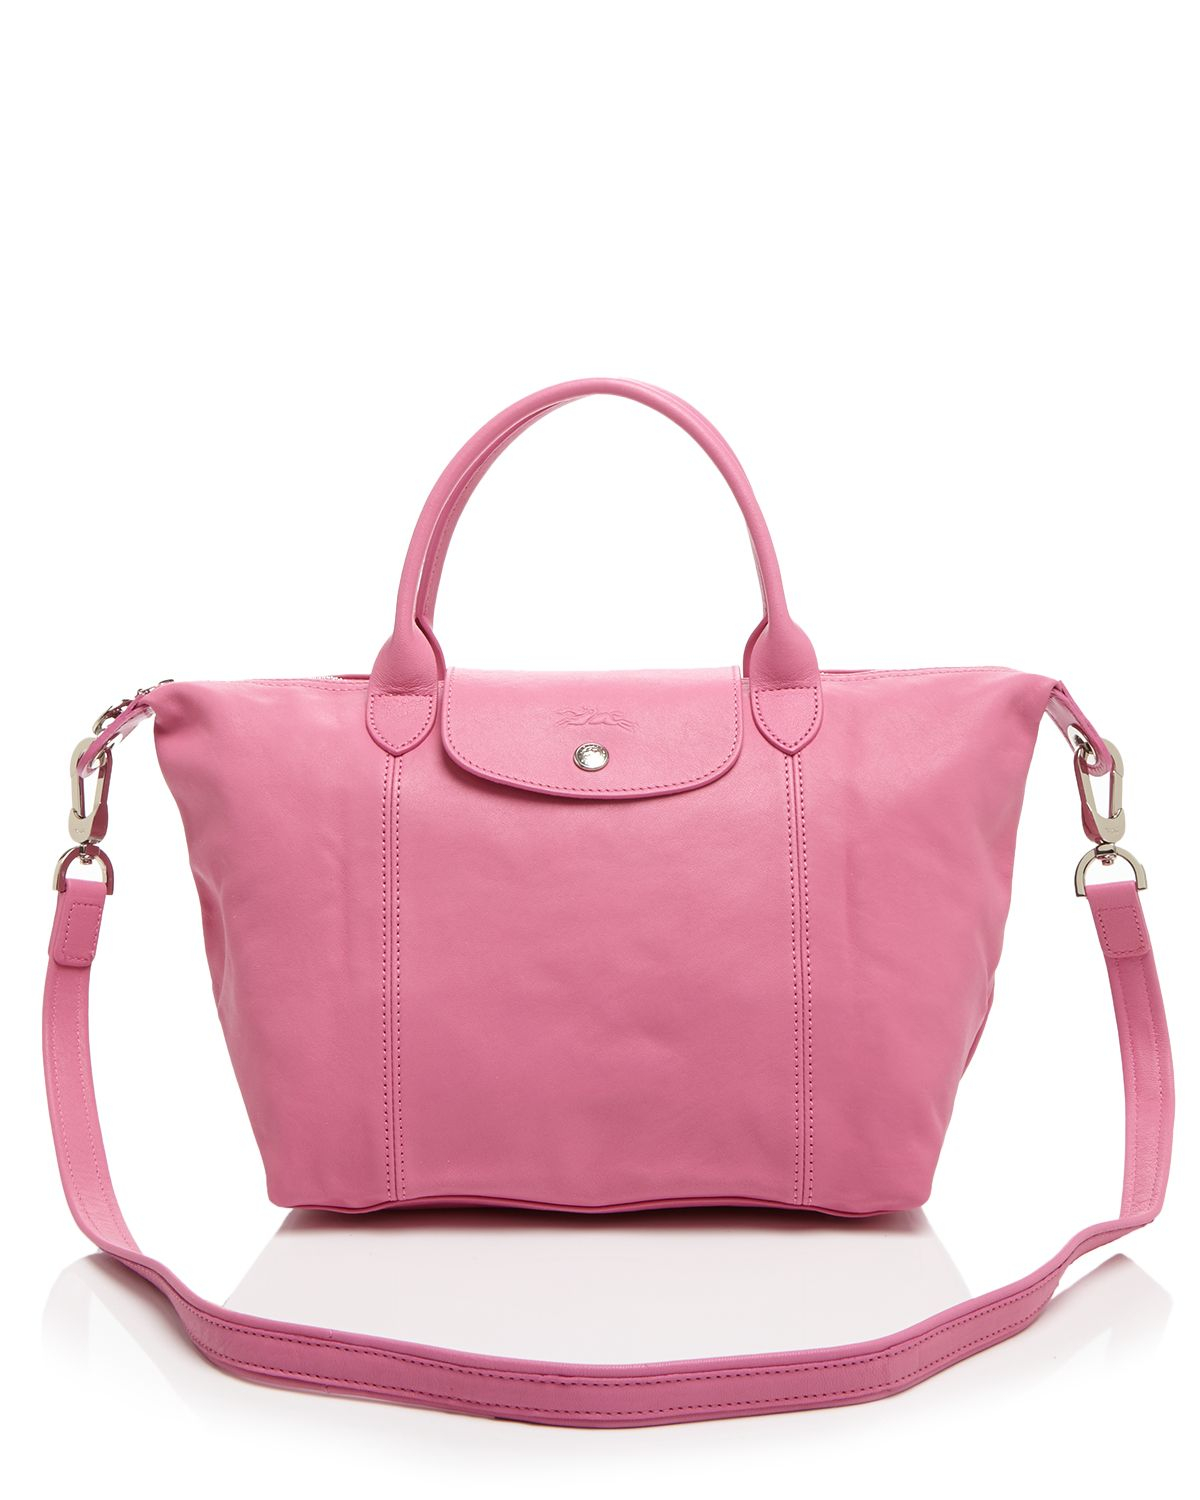 Lyst - Longchamp Shoulder Bag - Le Pliage Leather Cuir Small in Pink